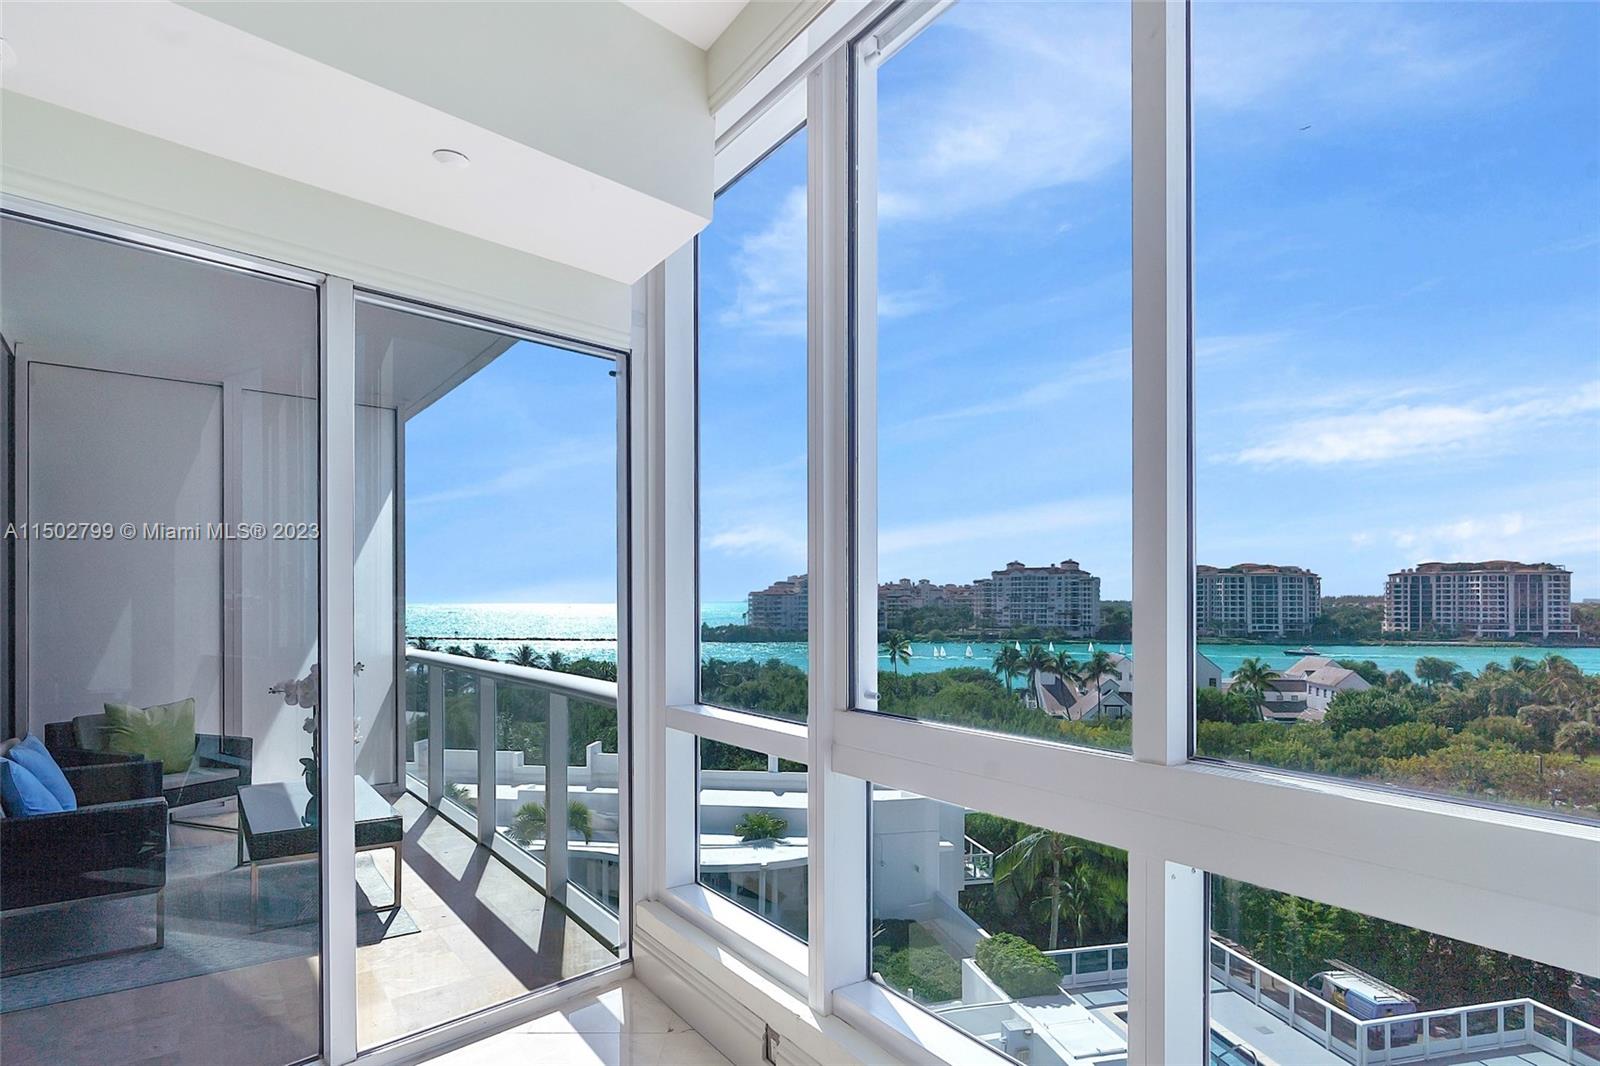 100 S Pointe Dr #702 For Sale A11502799, FL